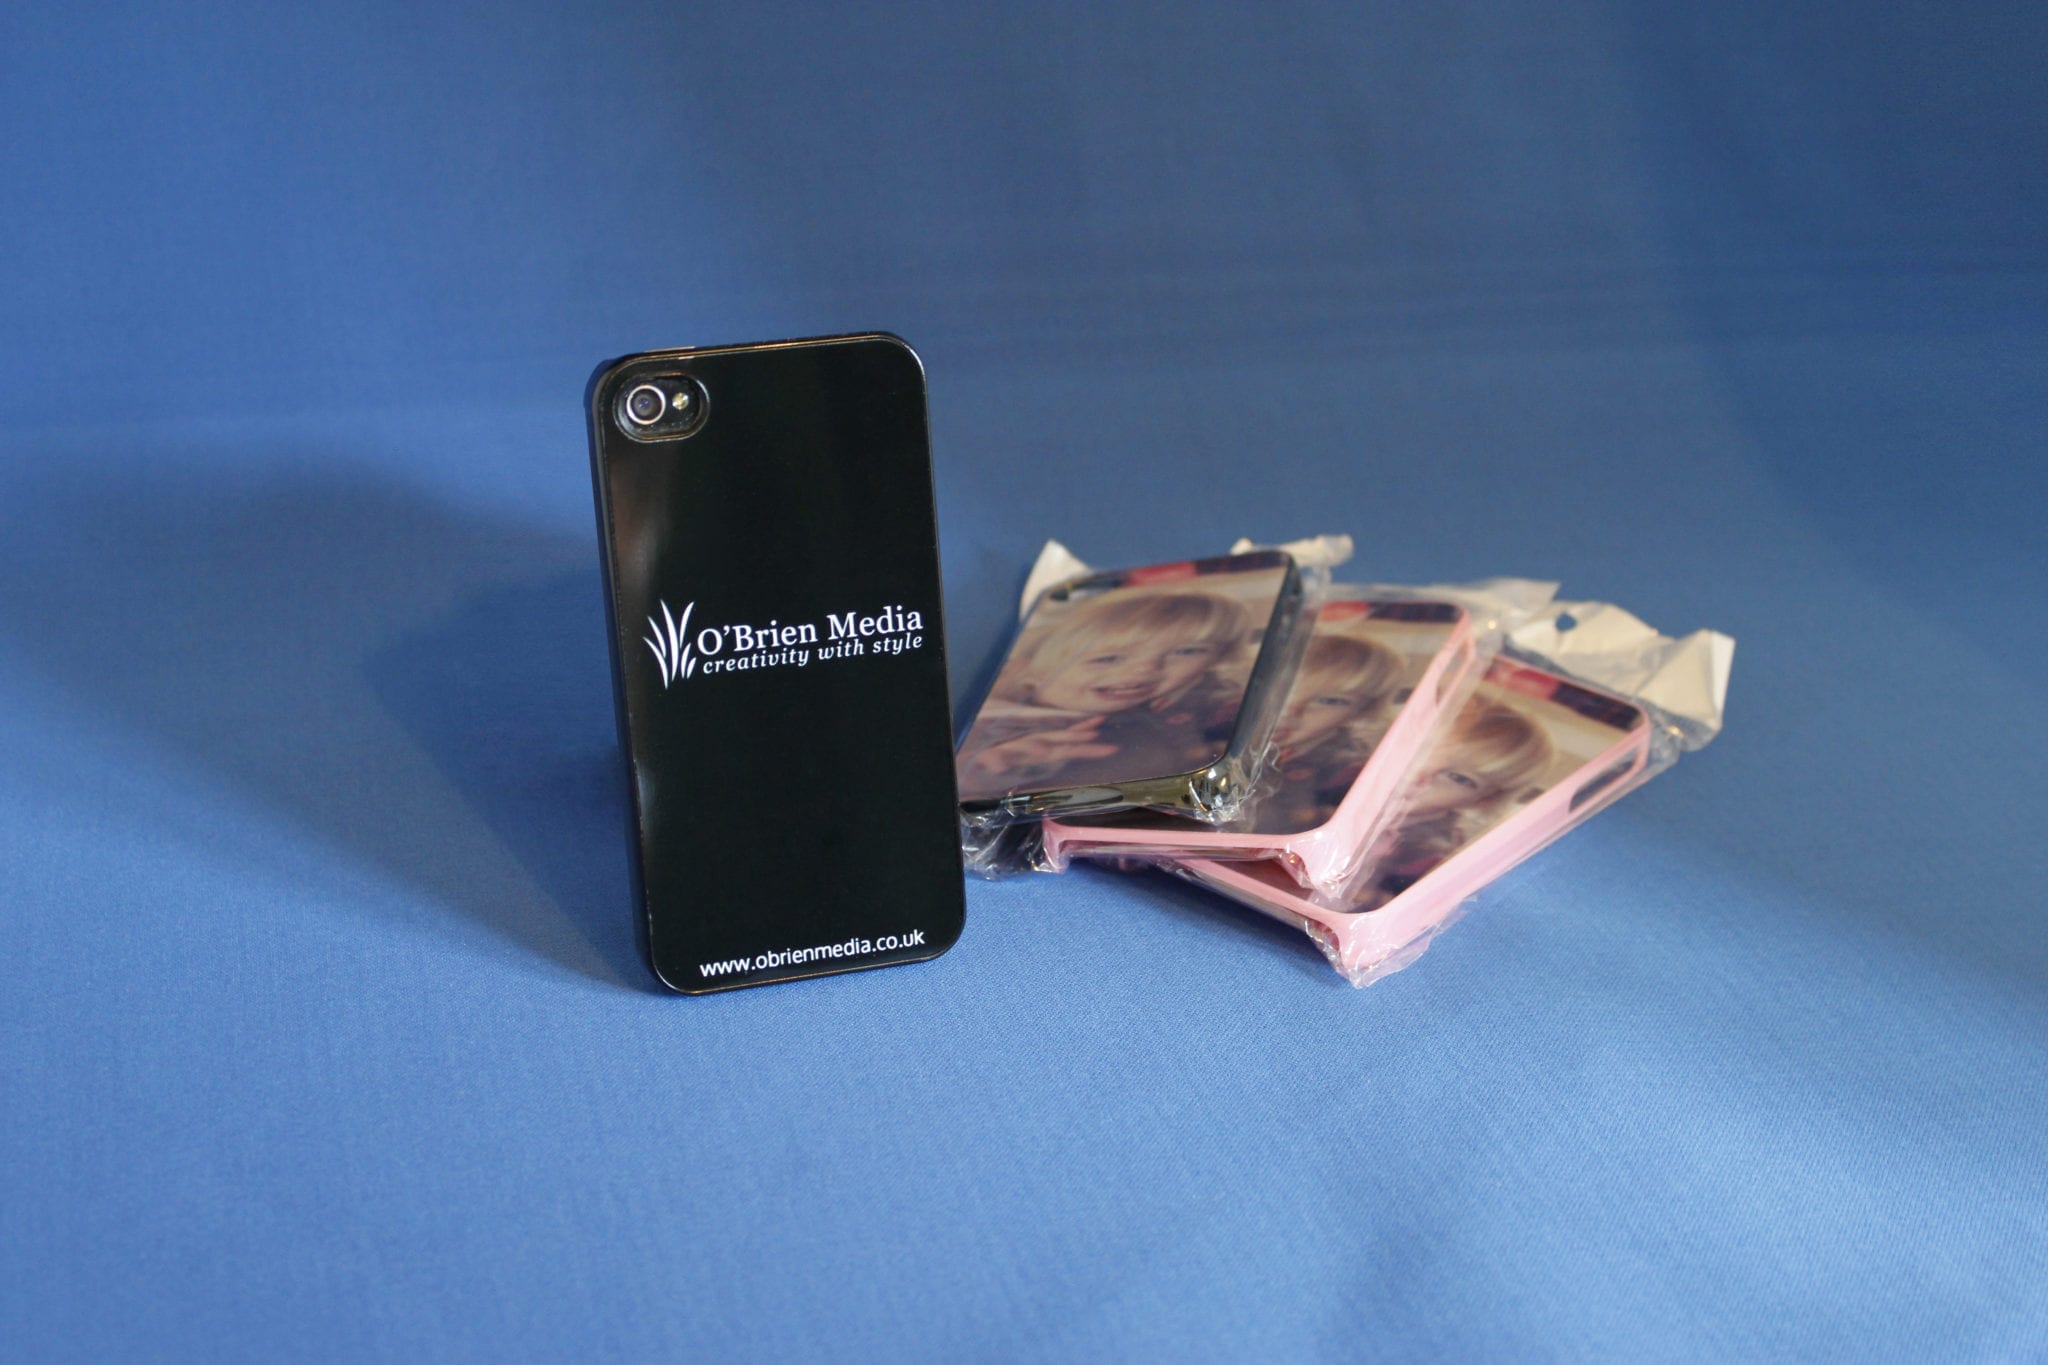 personalised-iphone-cases-are-a-great-way-to-promote-your-business-or-brand.jpg